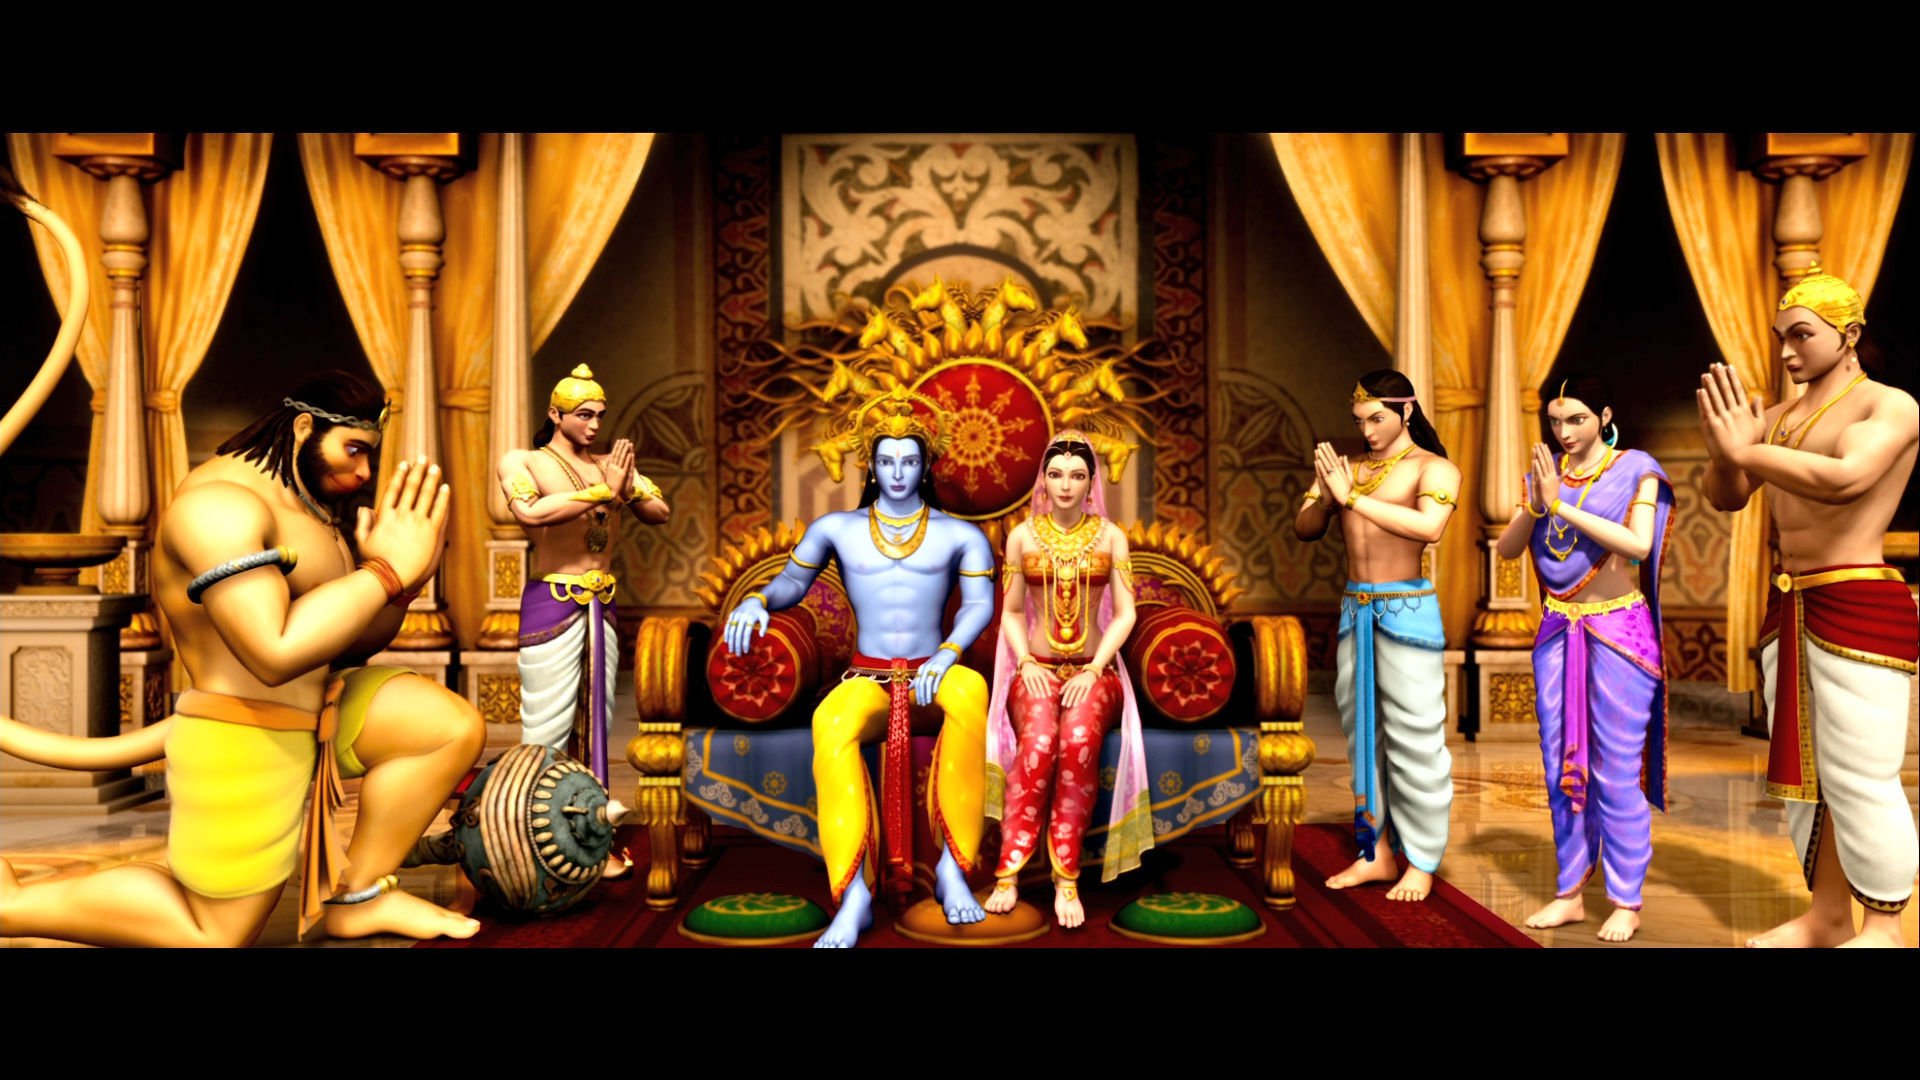 Sri Ram Wallpapers  God Images HD Pictures Photos Wallpaper